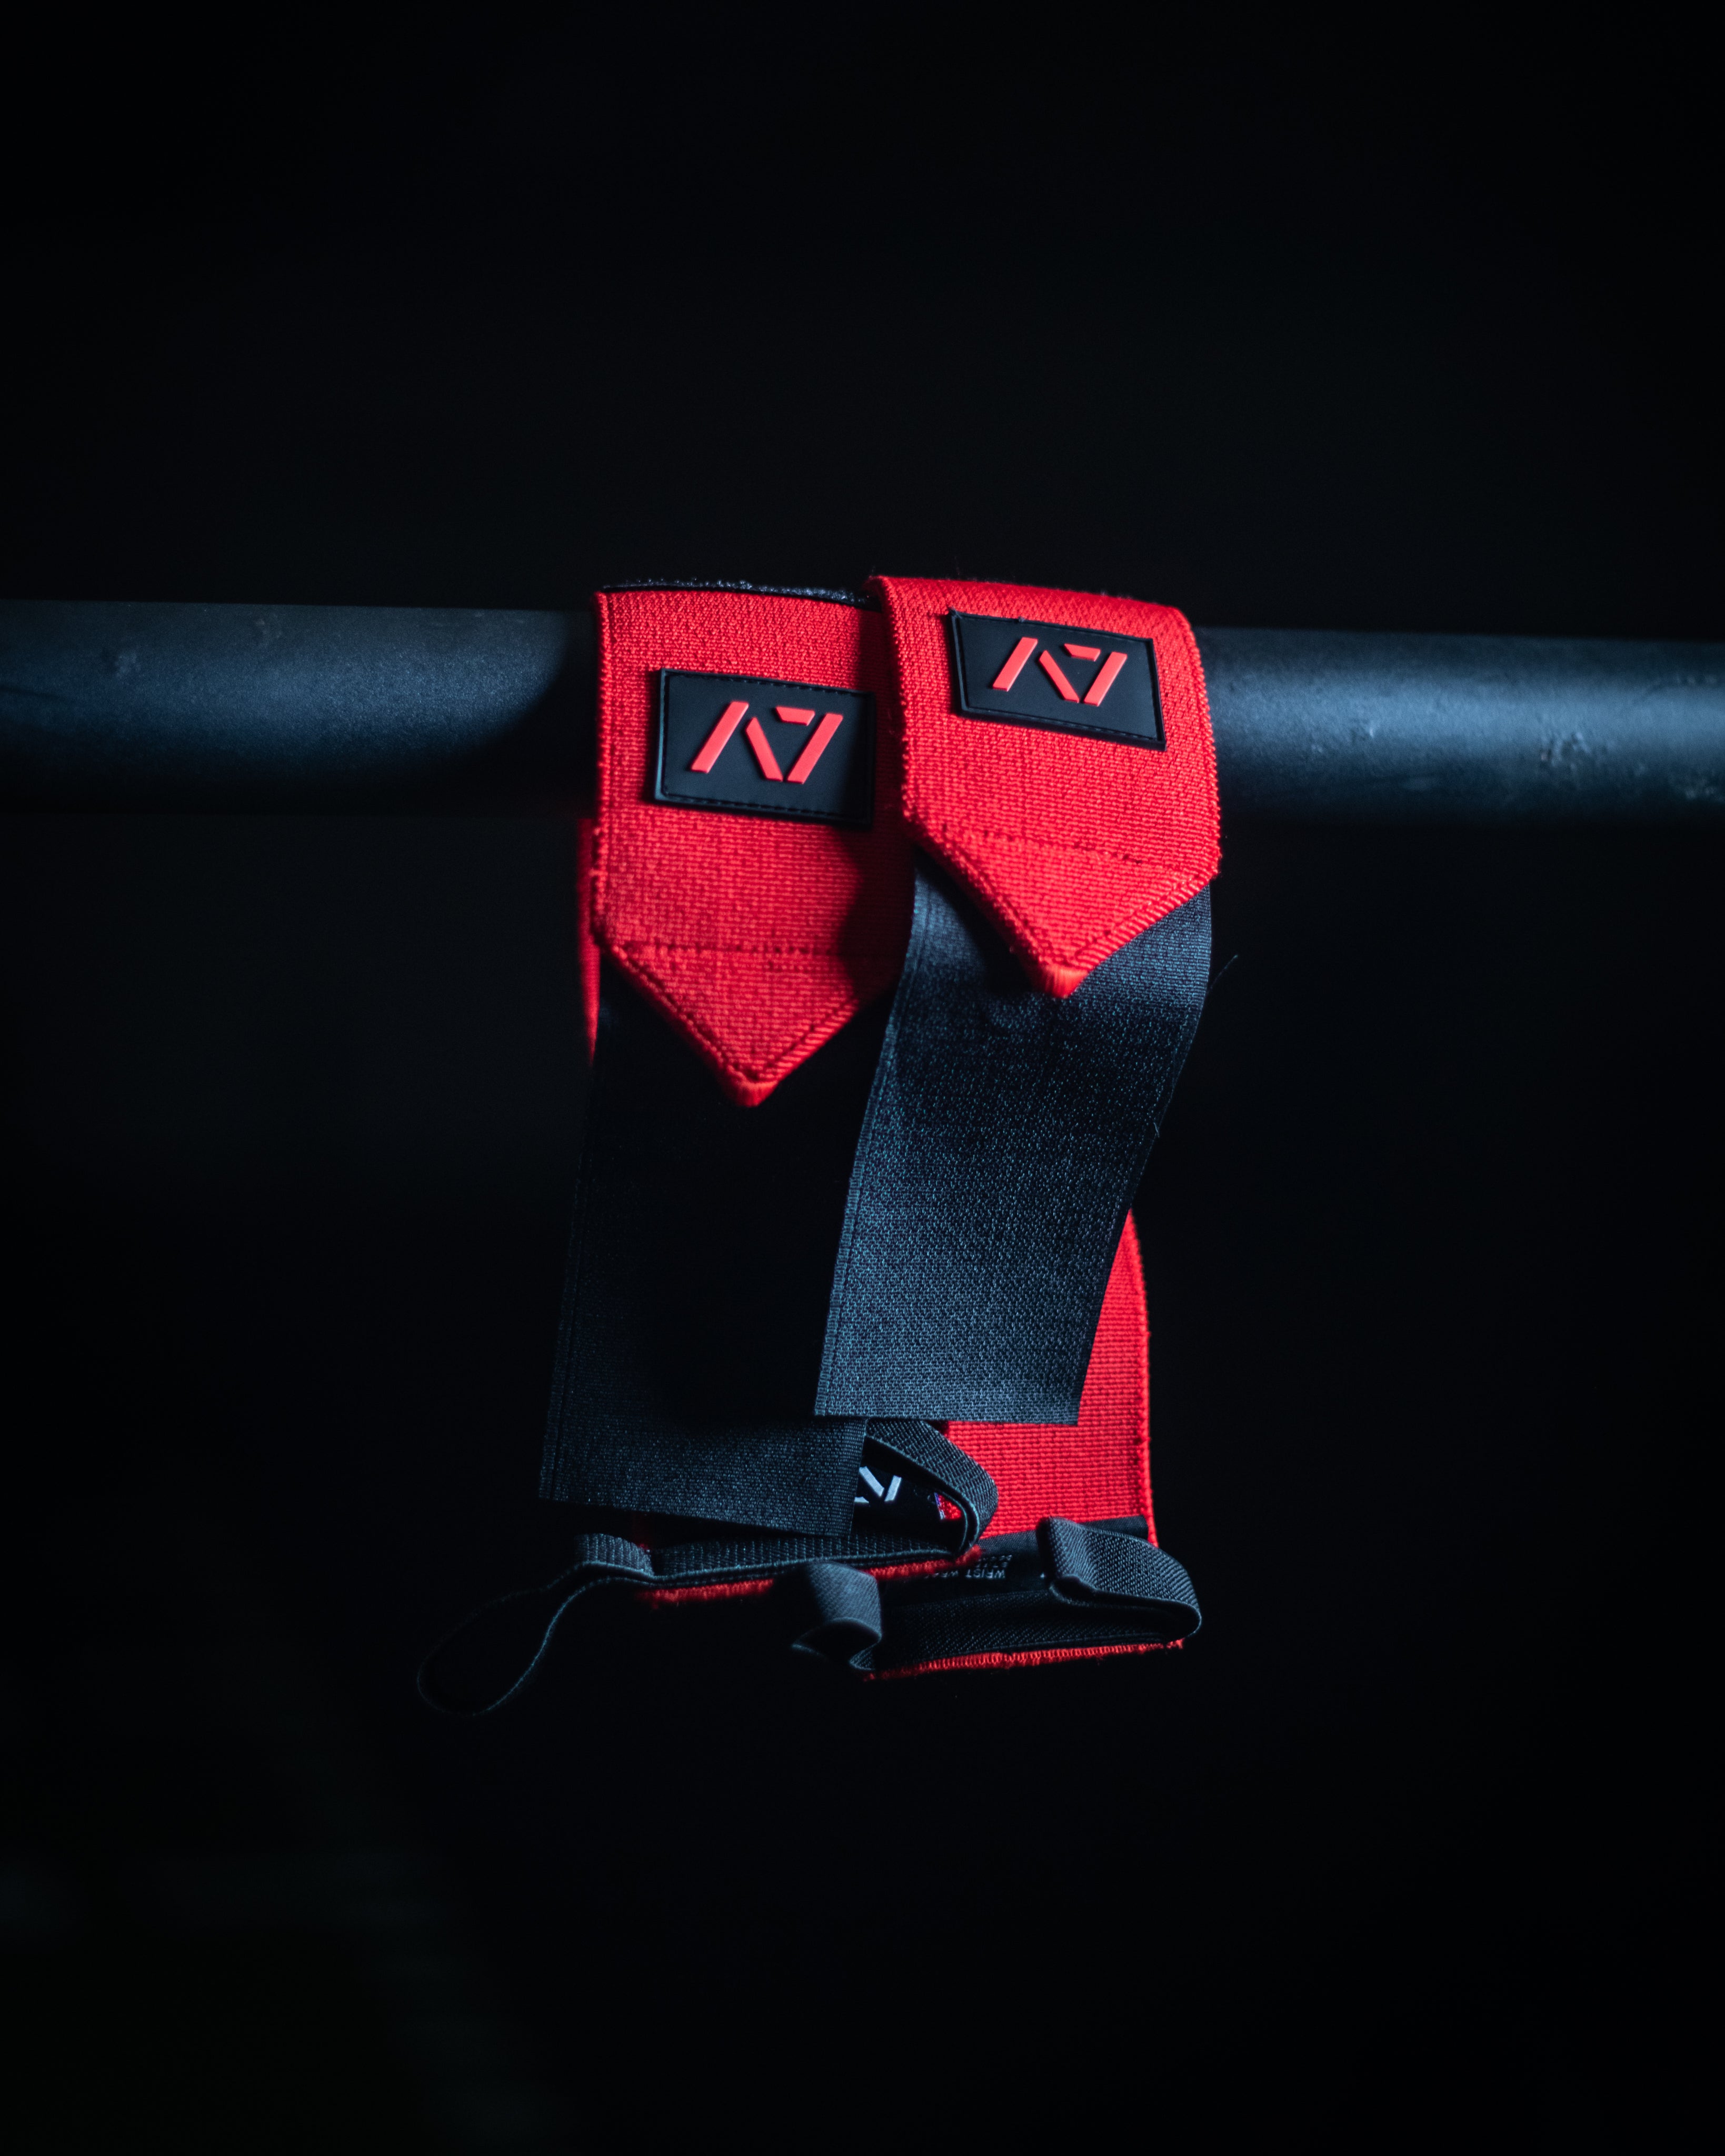 A7 IPF Approved Wrist Wraps – A7 EUROPE